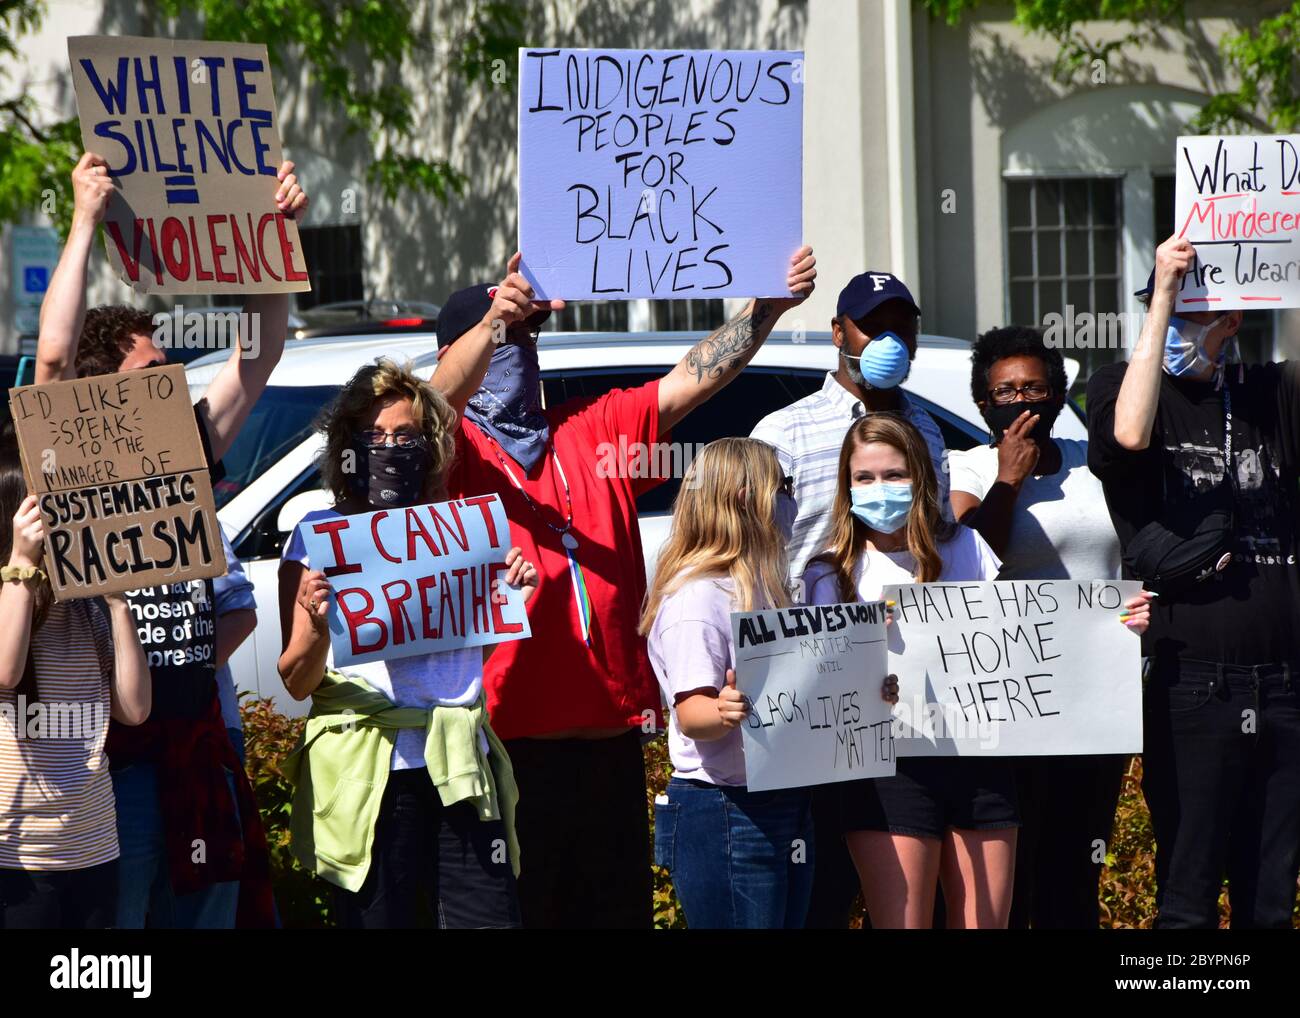 Bismarck, ND, USA. May 29, 2020  People with signs and banners march through streets in the city protesting the death of George Floyd. Stock Photo